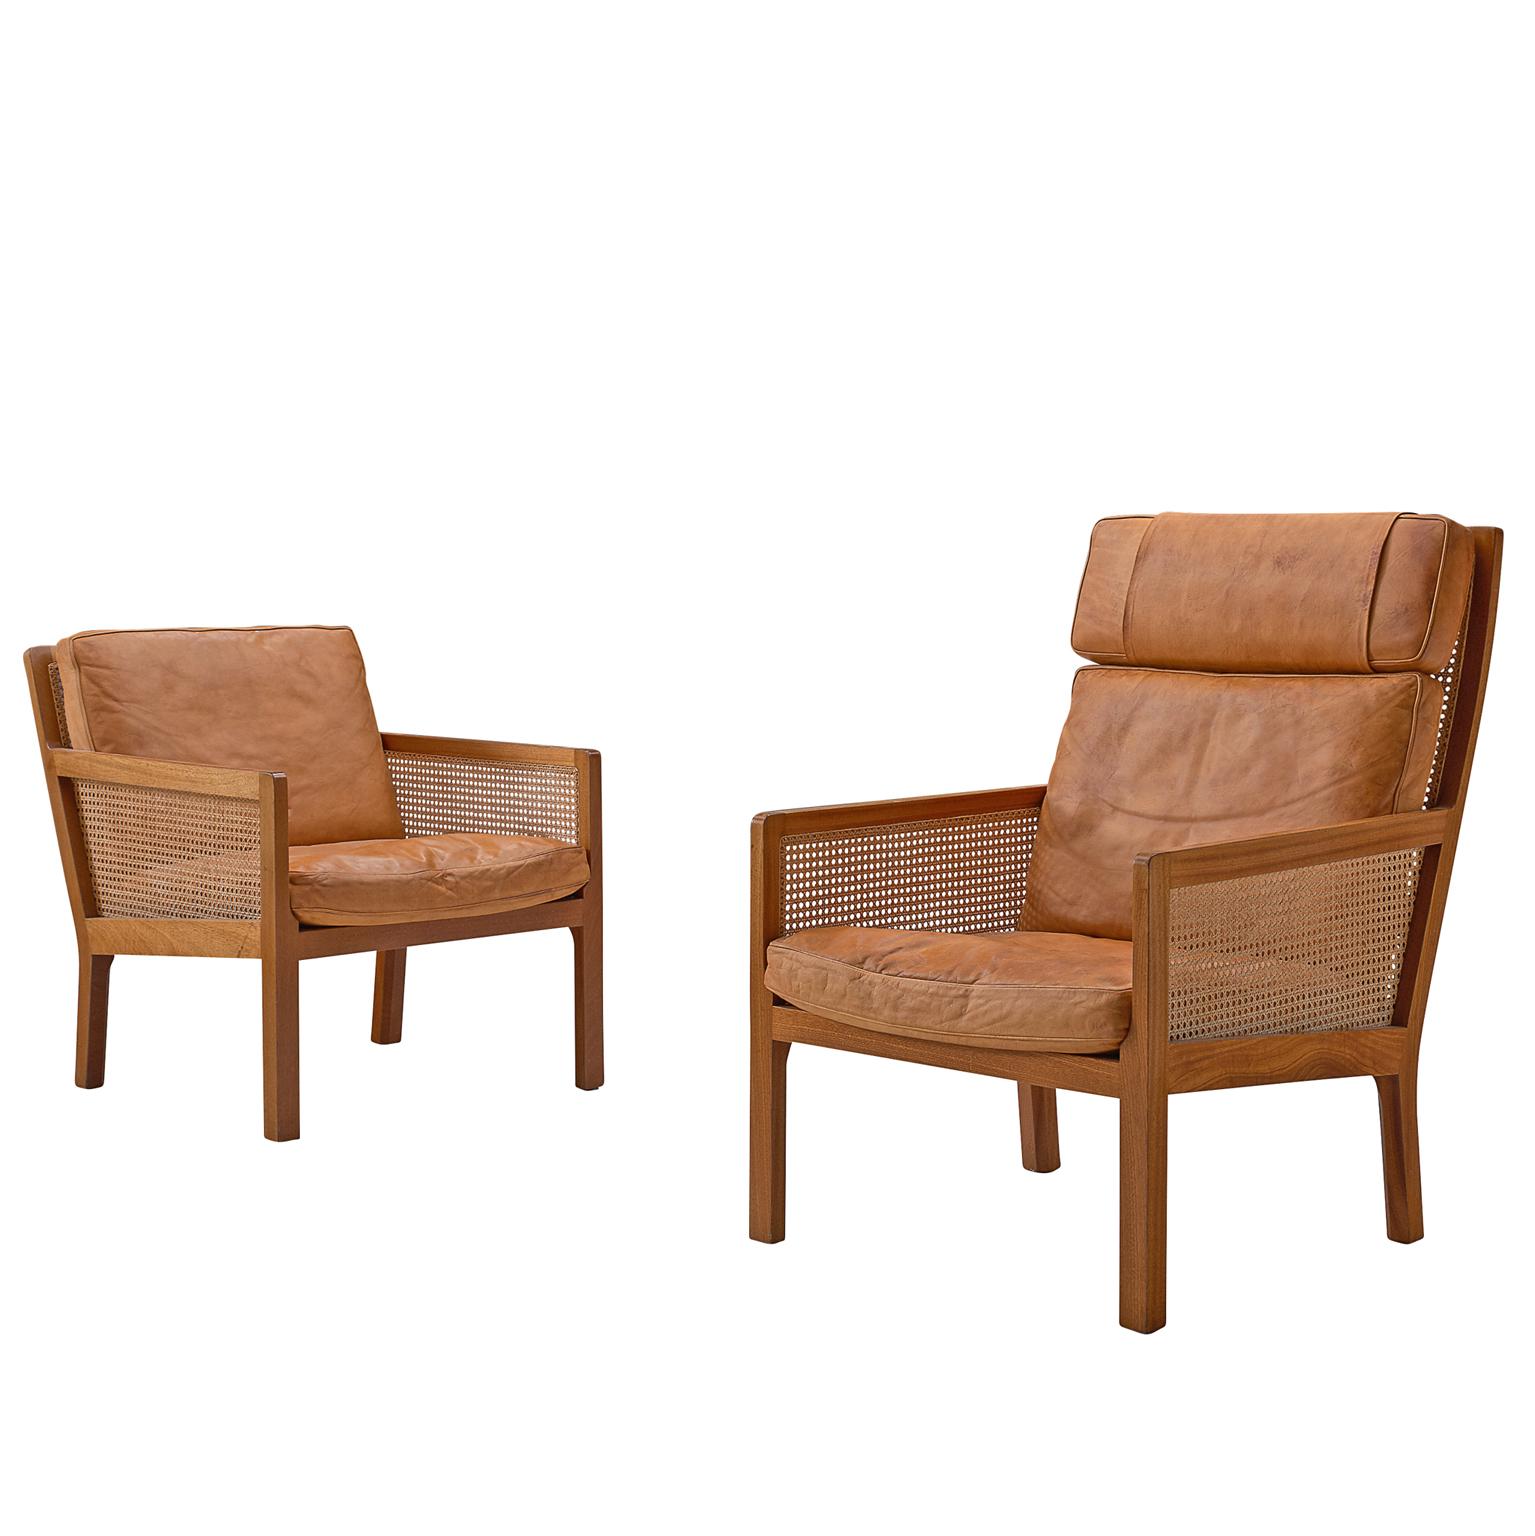 Set of Two Lounge Chairs in Mahogany and Cognac Leather